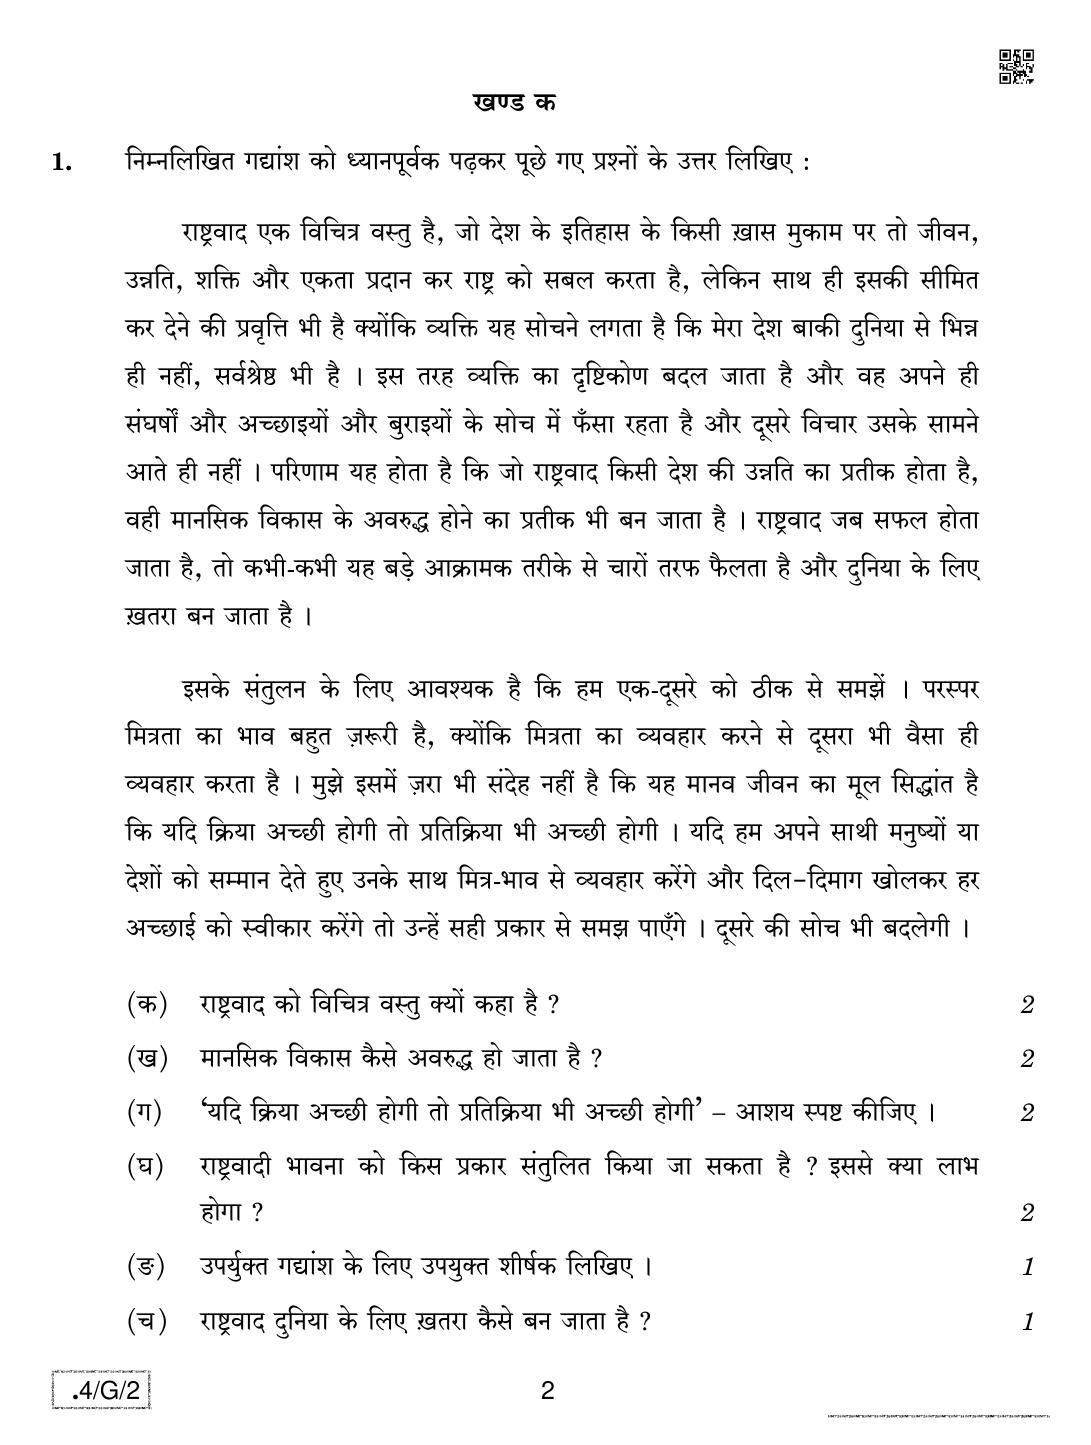 CBSE Class 10 4-C-2 Hindi B 2020 Compartment Question Paper - Page 2